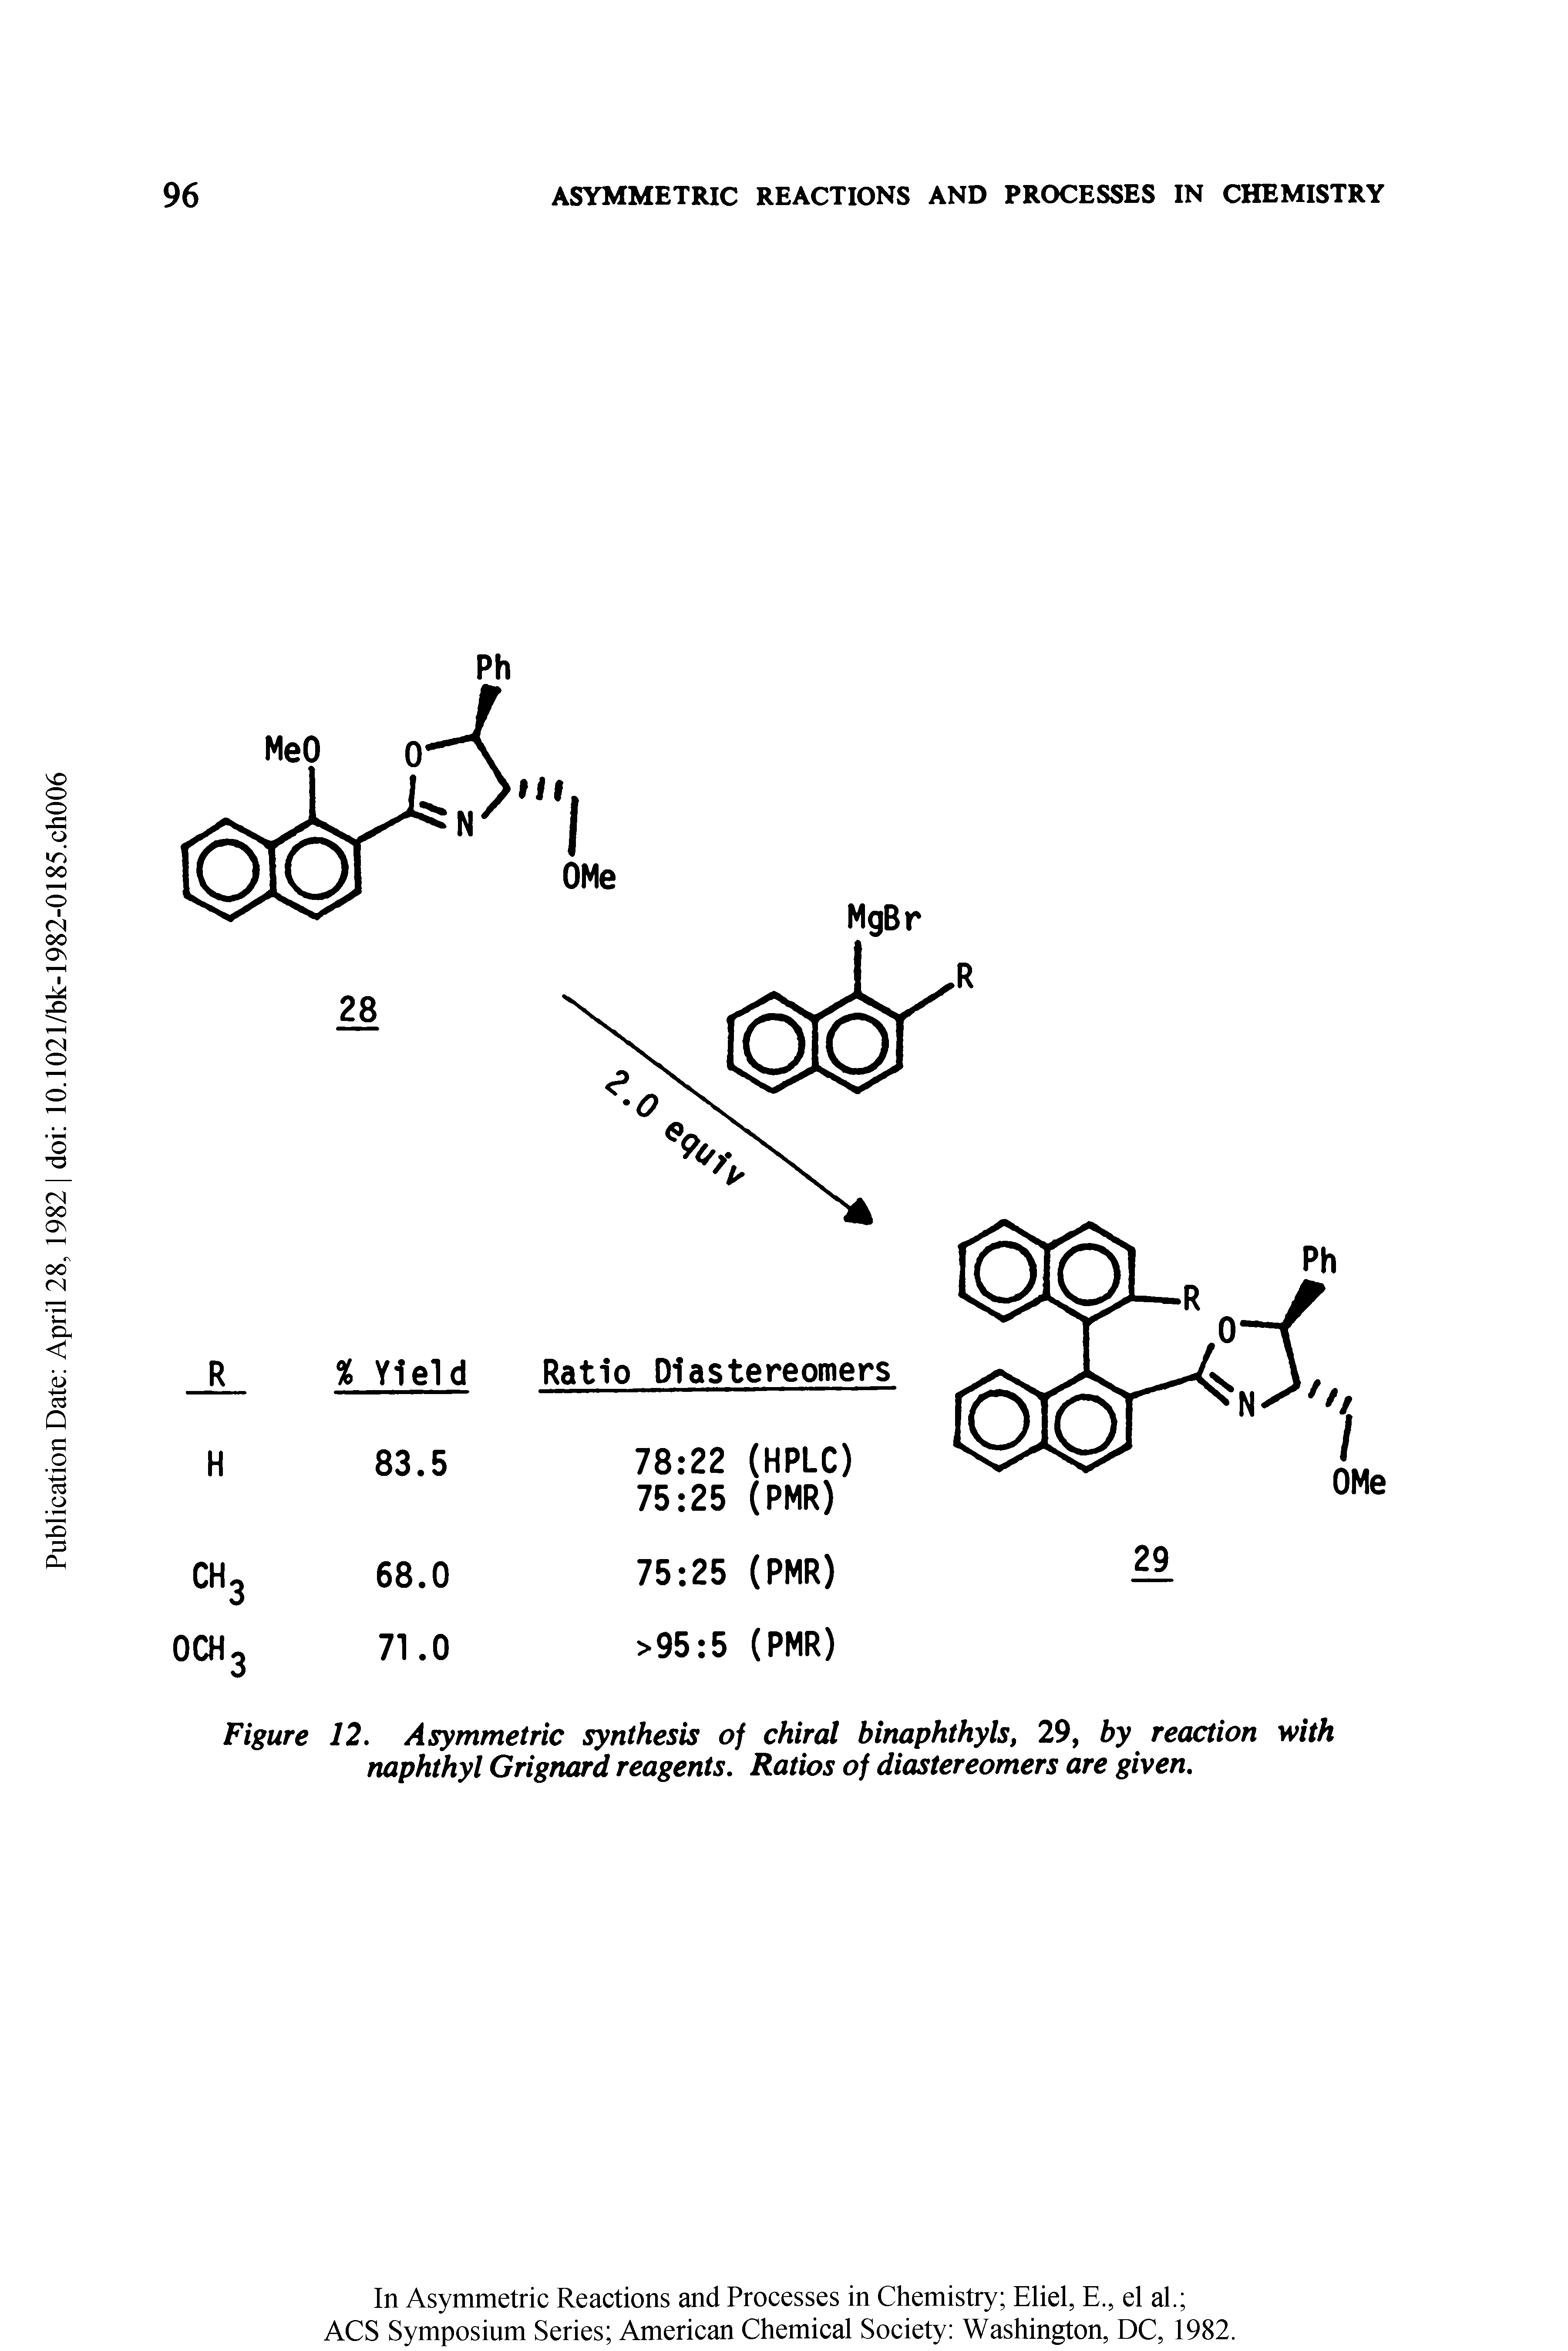 Figure 12. Asymmetric synthesis of chiral birmphthyls, 29, by reaction with naphthyl Grignard reagents. Ratios of diastereomers are given.